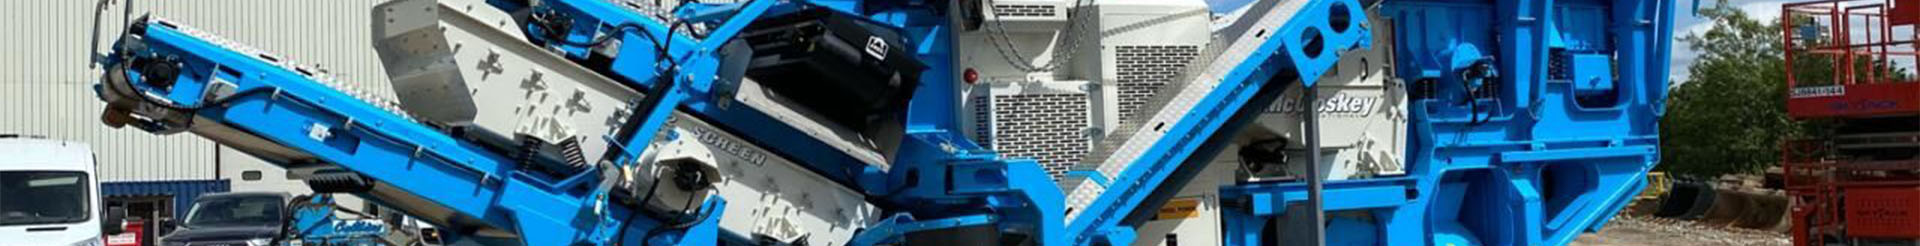 Mobile jaw crusher -LT100